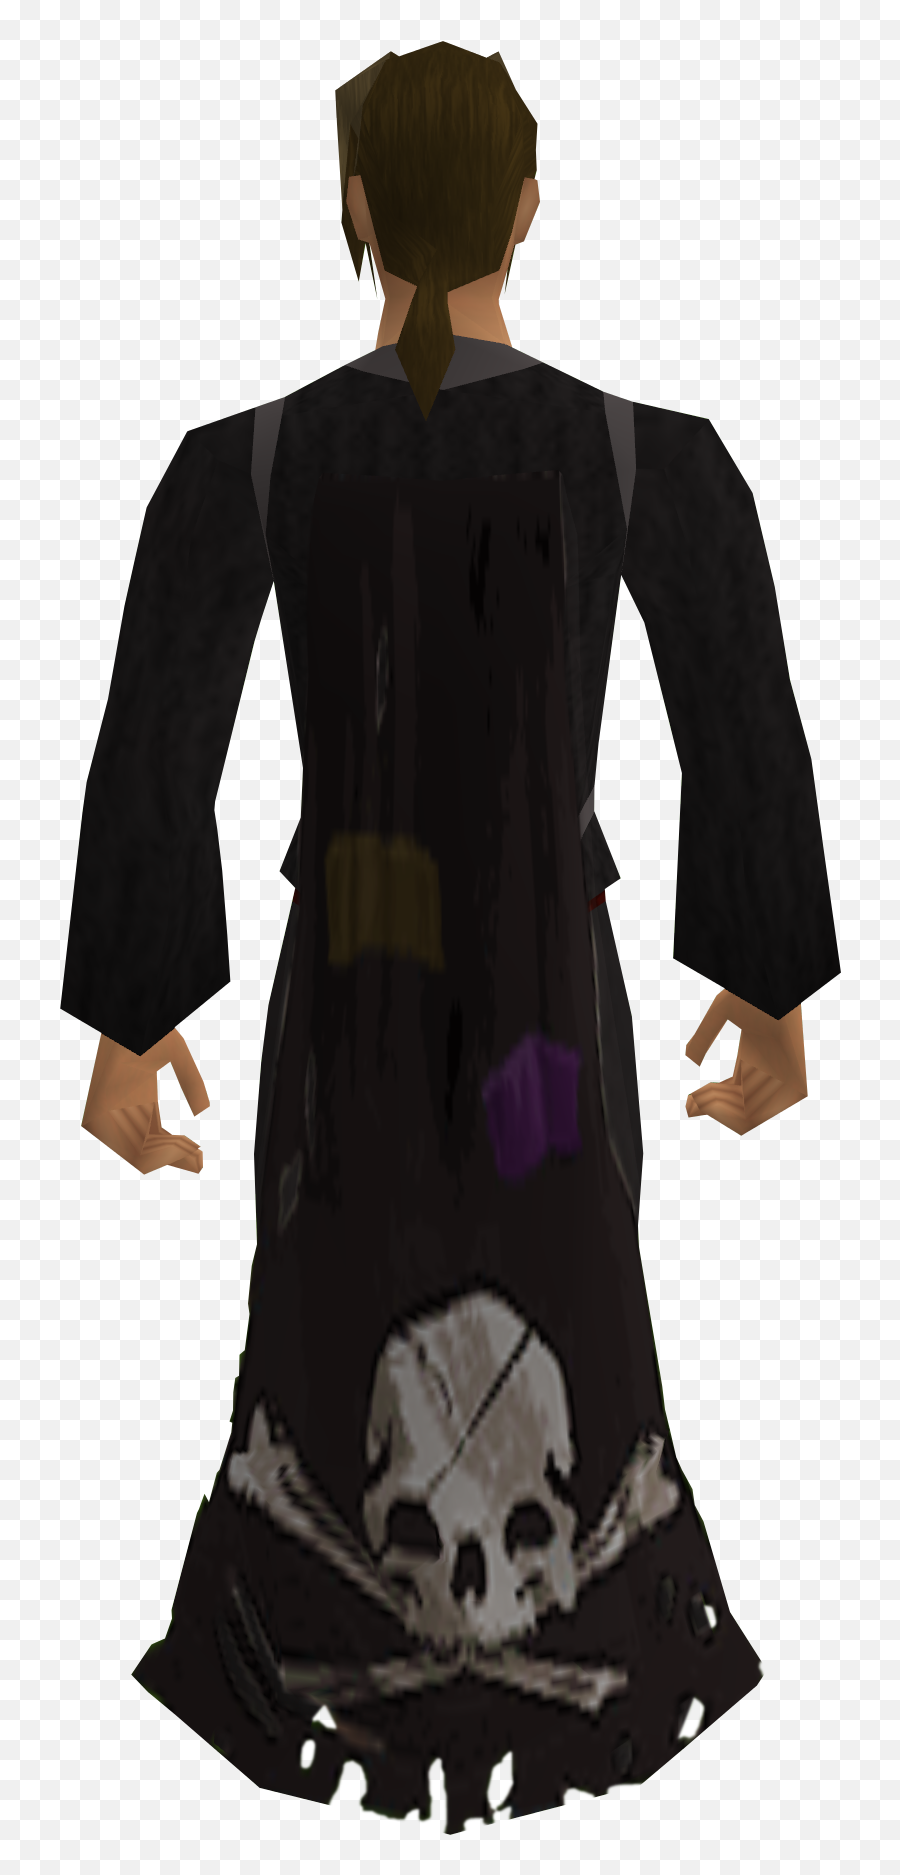 Jolly Roger Cape - The Runescape Wiki Runescape Png,Jolly Roger Png